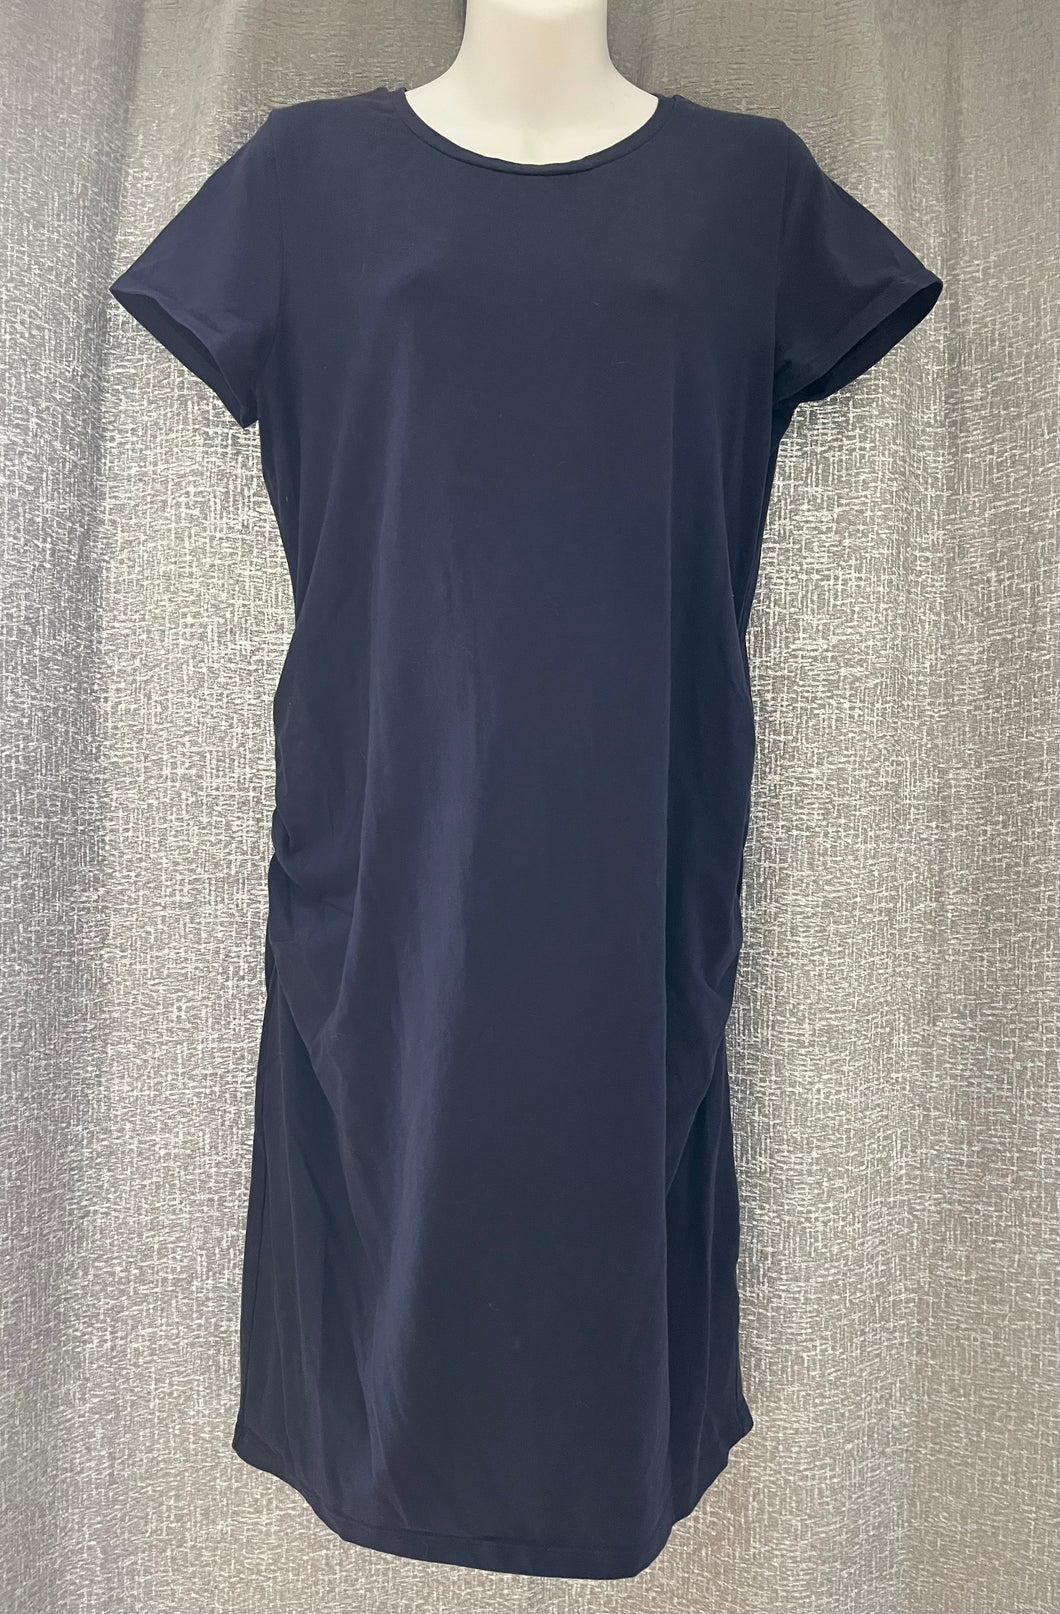 Old Navy XL Maternity Fitted Dress